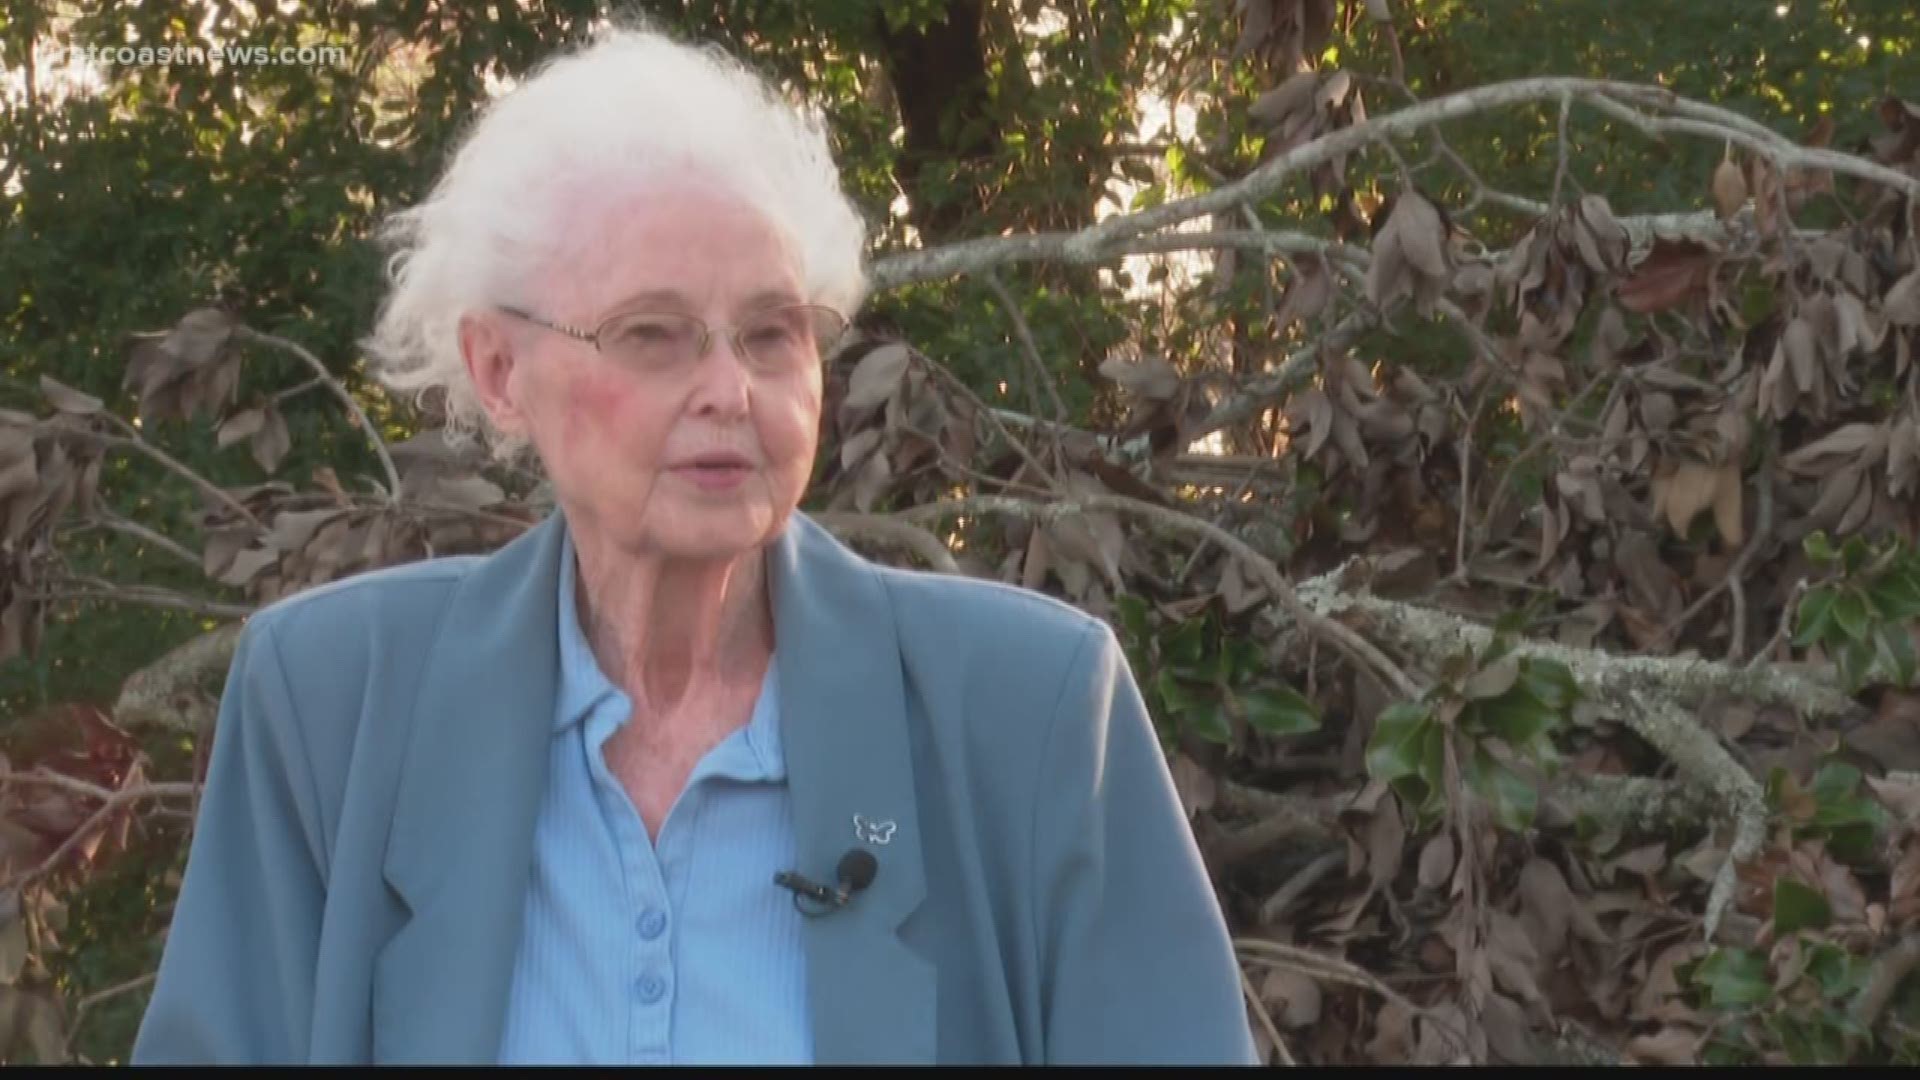 Joyce Hodges paid East Coast Tree Pros around Thanksgiving to remove a tree, but it's still standing in her yard.